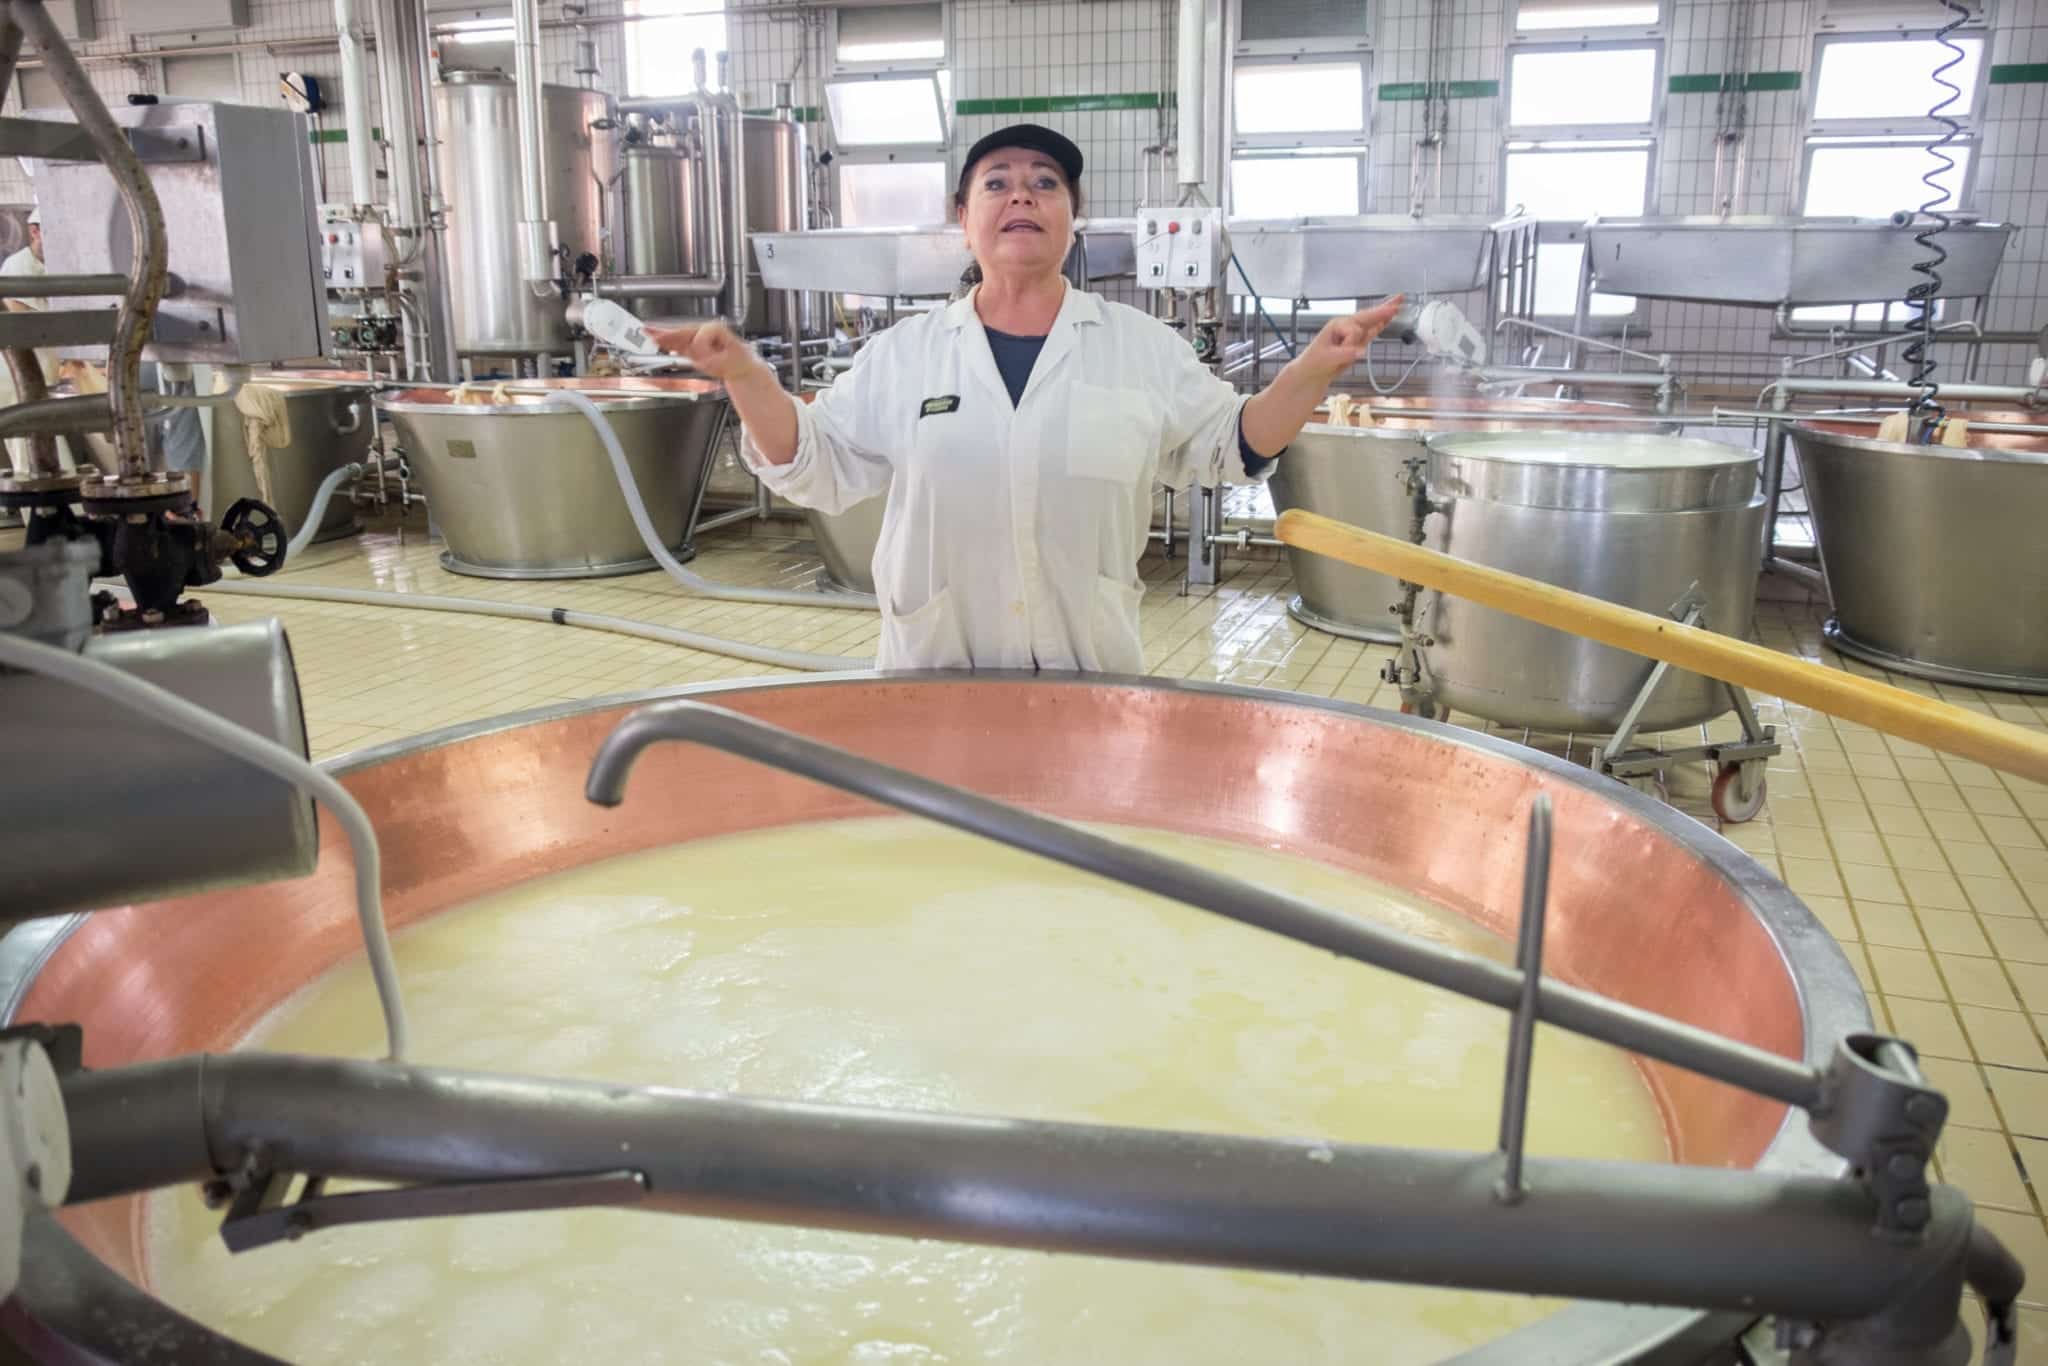 A woman in a smock stands in front of a liquid vat, spreading her arms and talking about cheese.